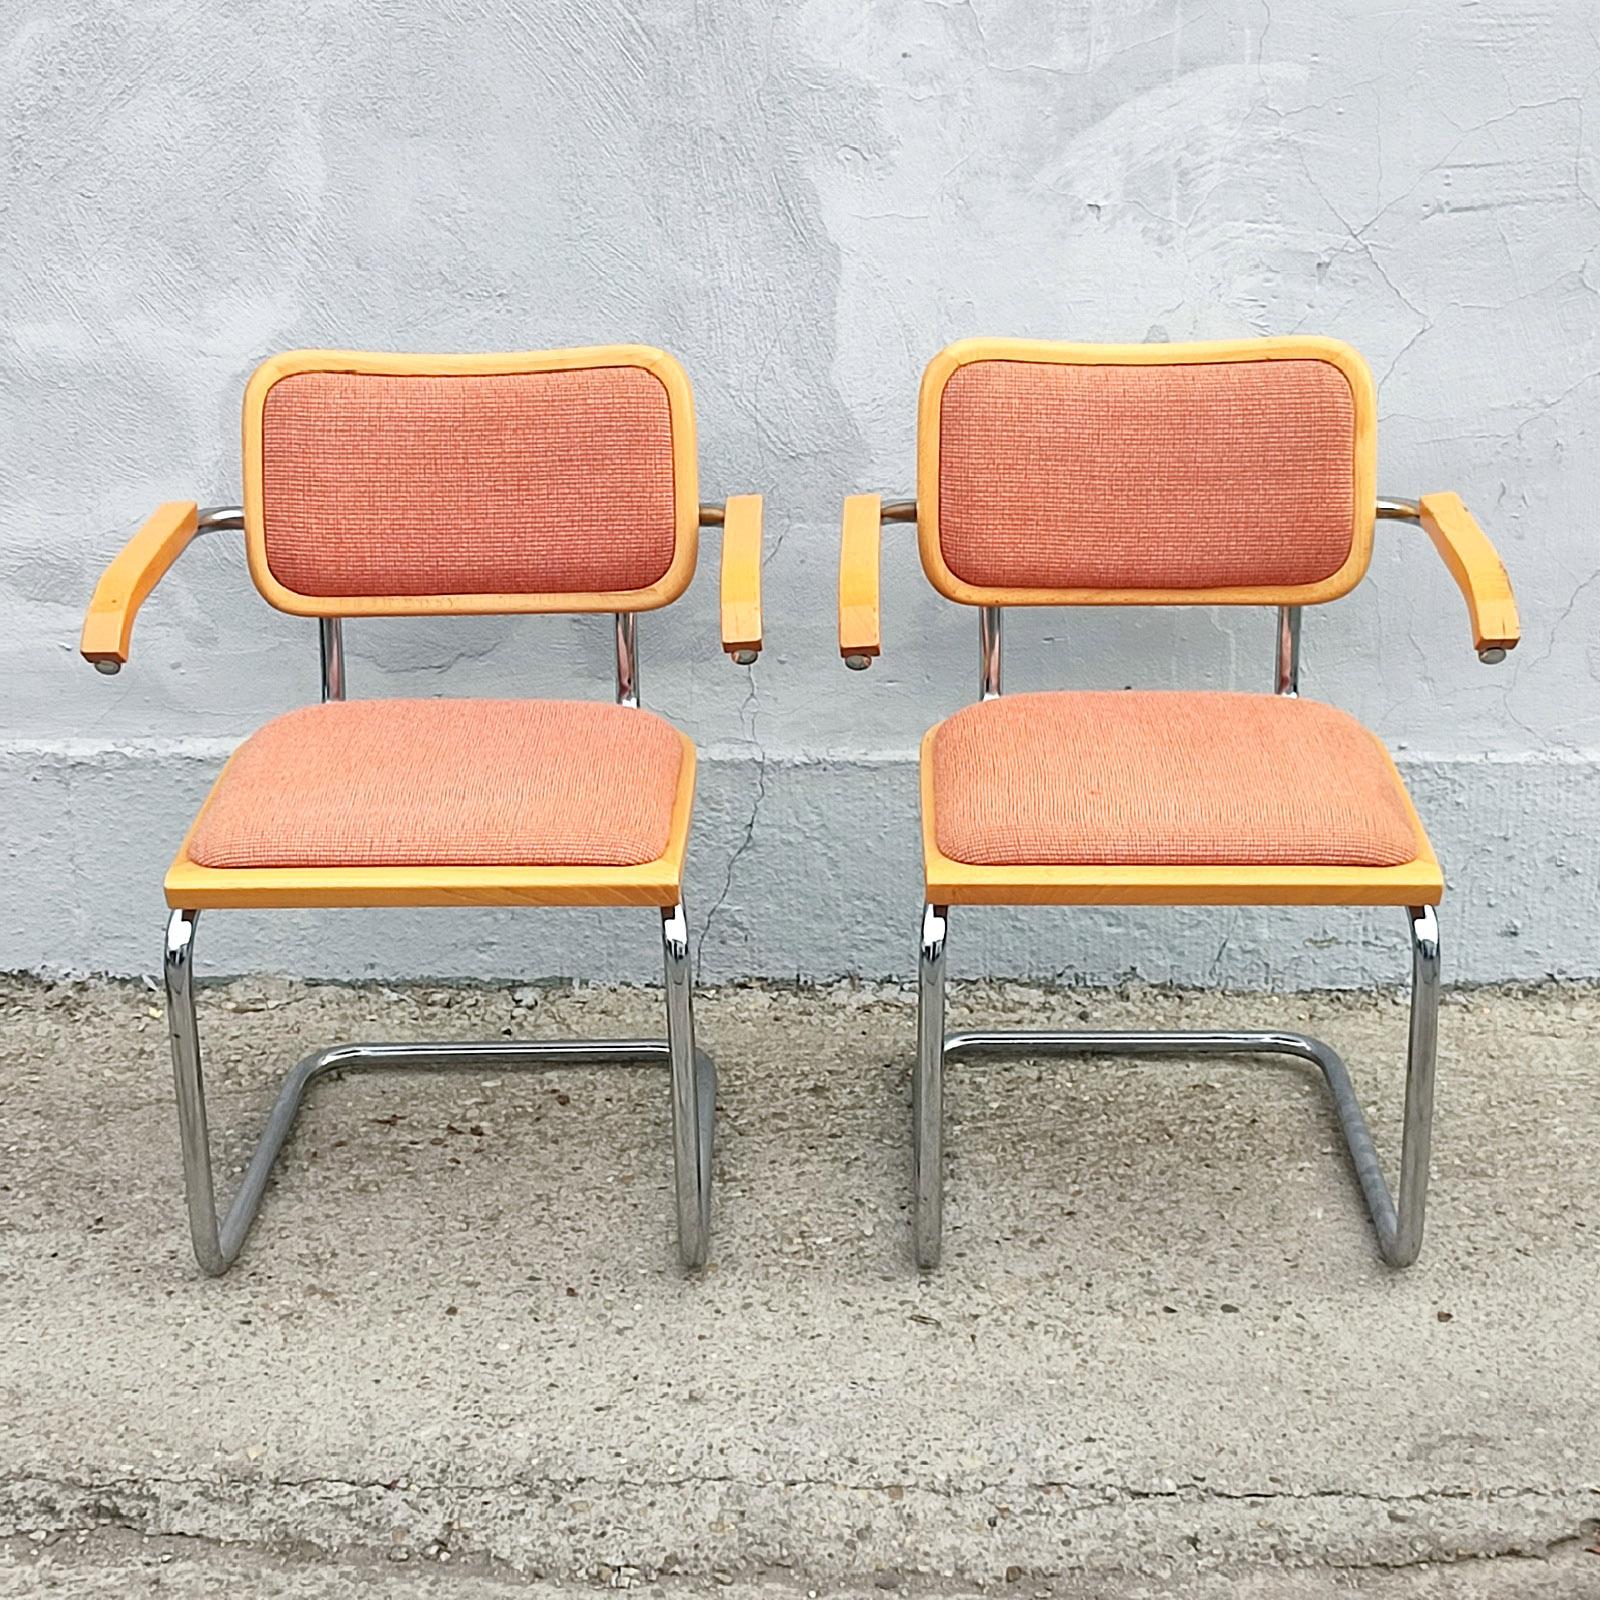 Bauhaus Pair of Wood Upholstery and Nickel Cesca Armchairs Chairs, 1970s For Sale